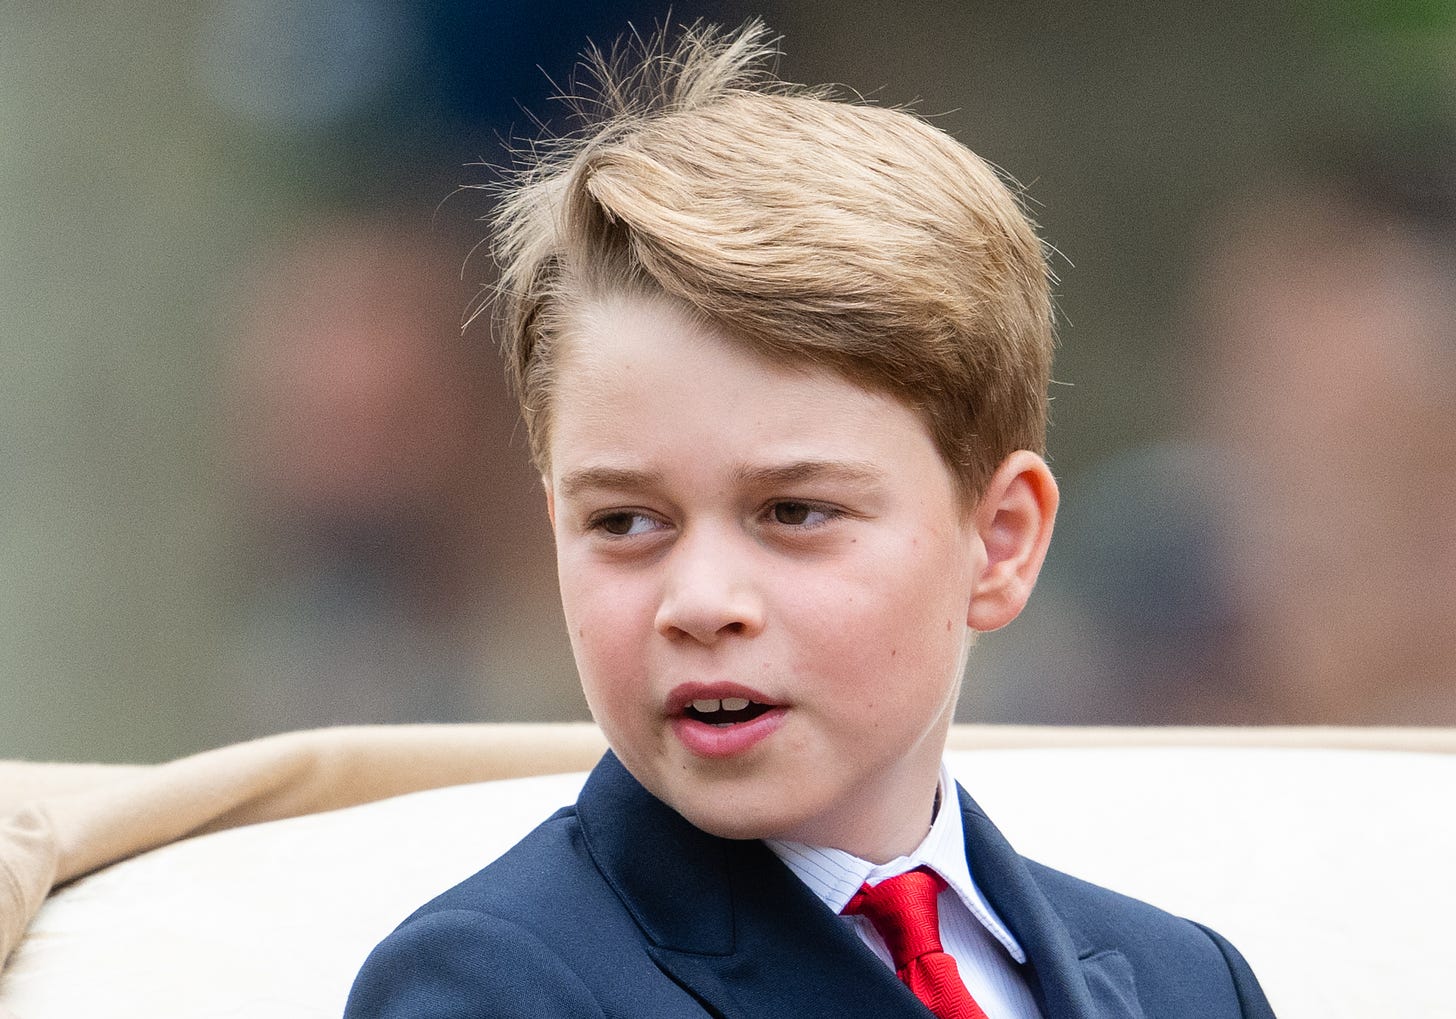 Prince George wearing blazer and red tie